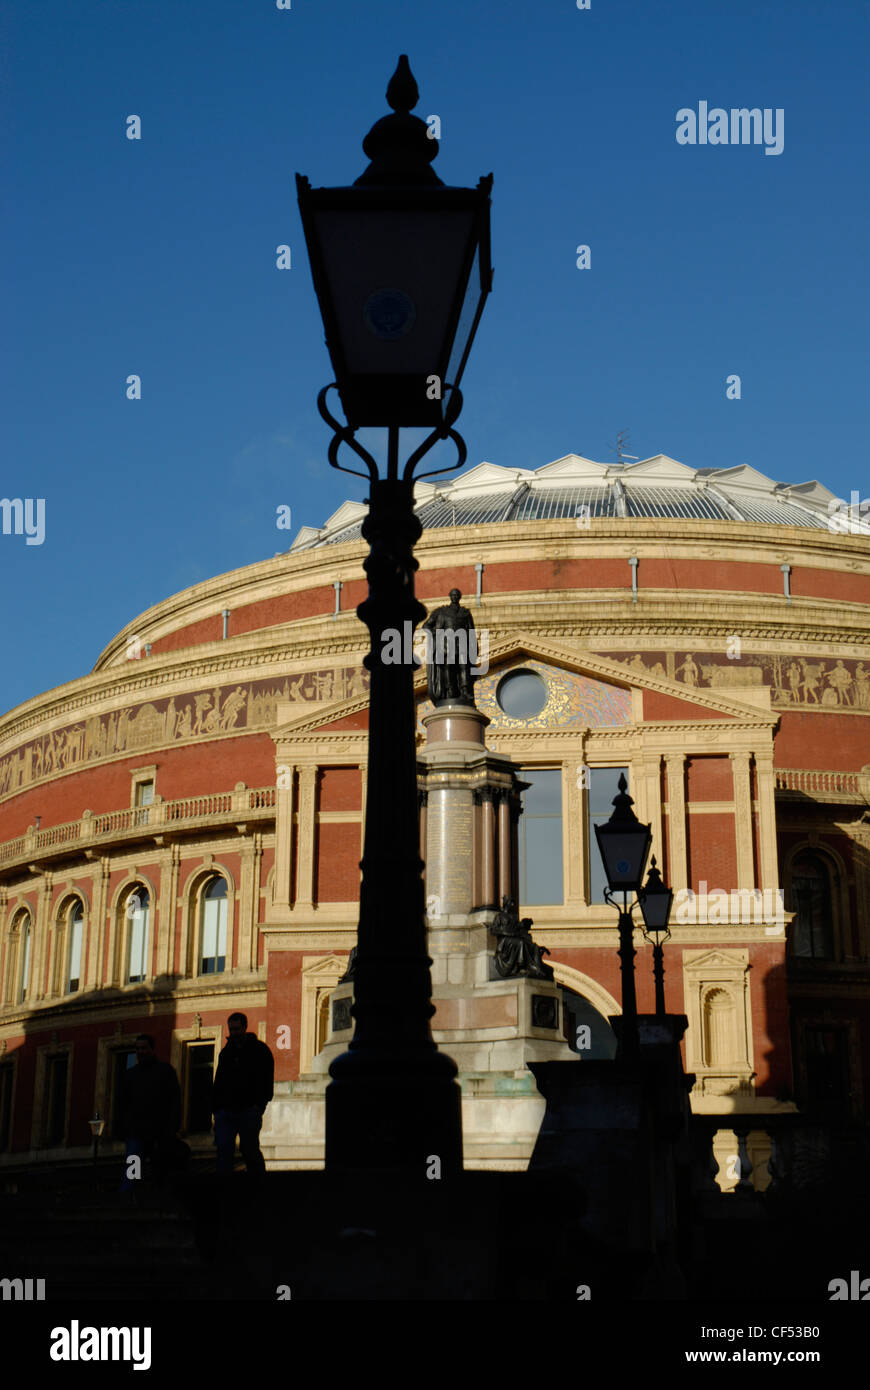 Victorian streetlamps silhouetted against the Royal Albert Hall in London. Stock Photo